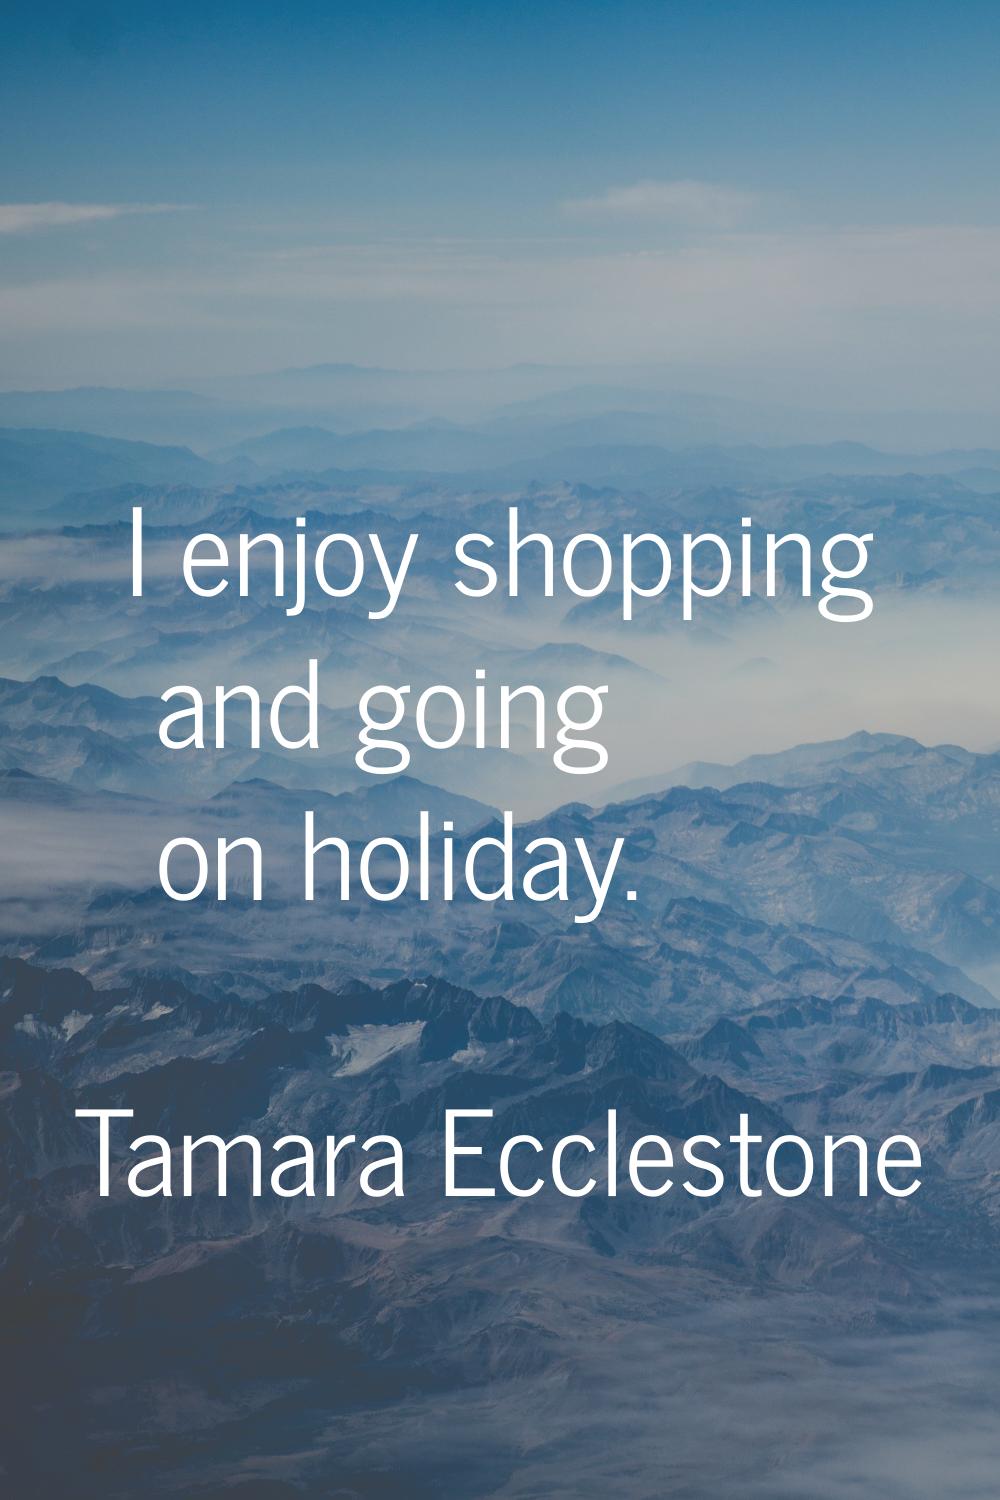 I enjoy shopping and going on holiday.